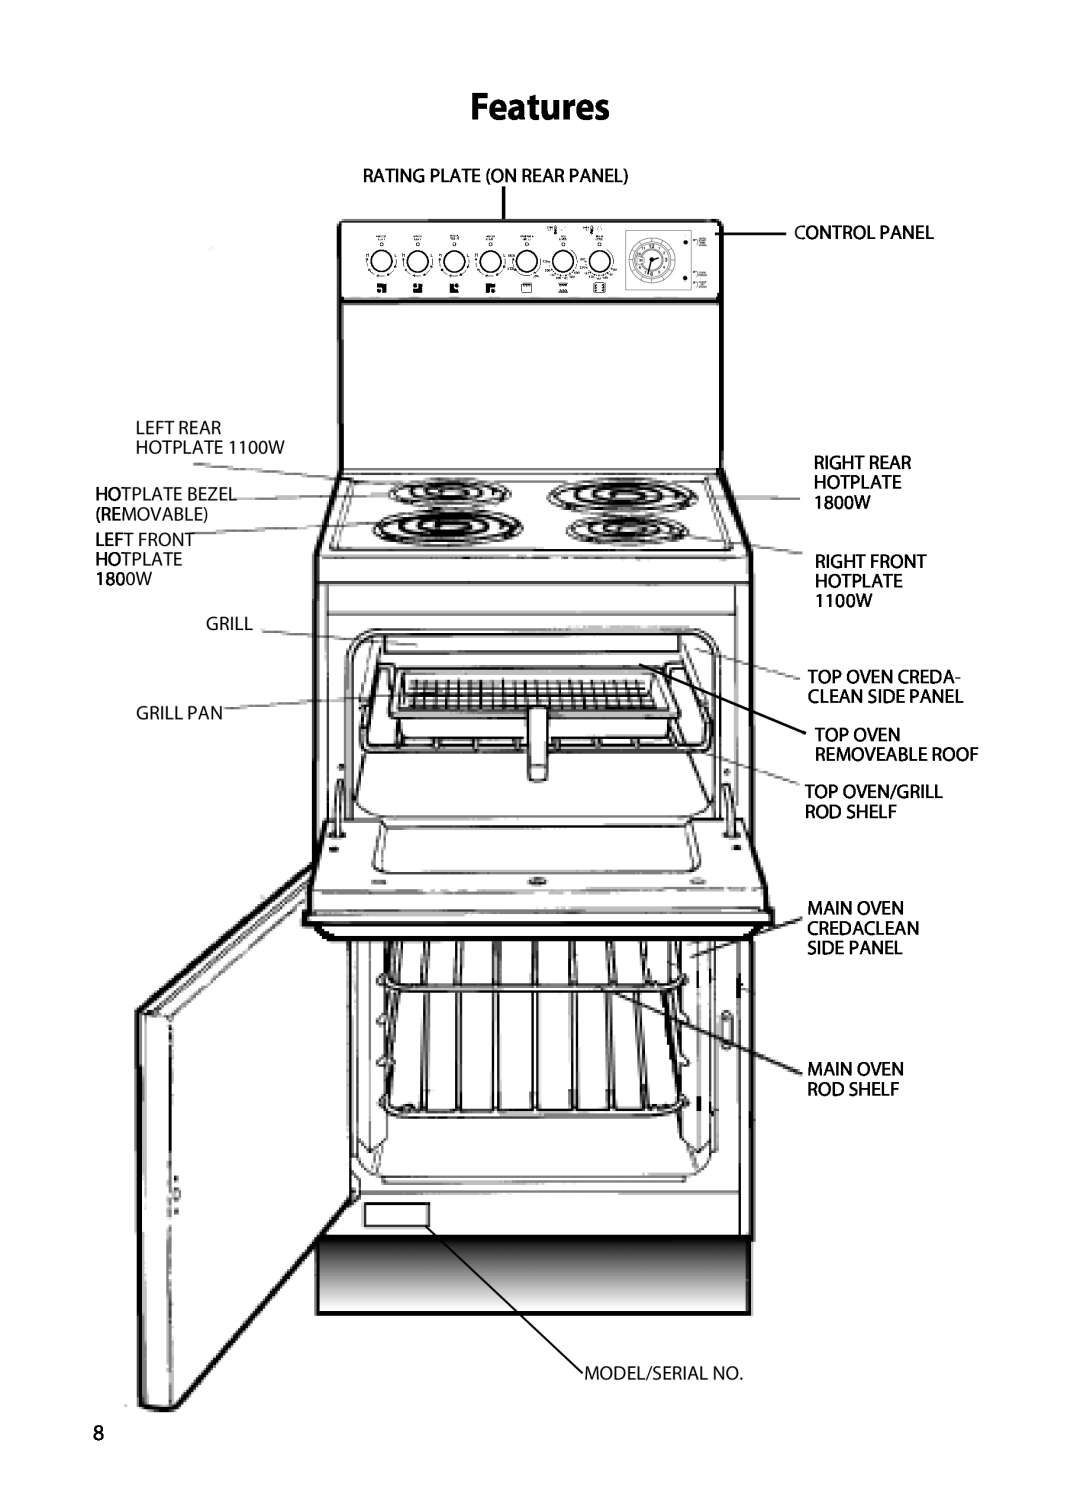 Hotpoint H250E manual Features, LEFT FRONT HOTPLATE 1800W GRILL GRILL PAN, Rating Plate On Rear Panel Control Panel 